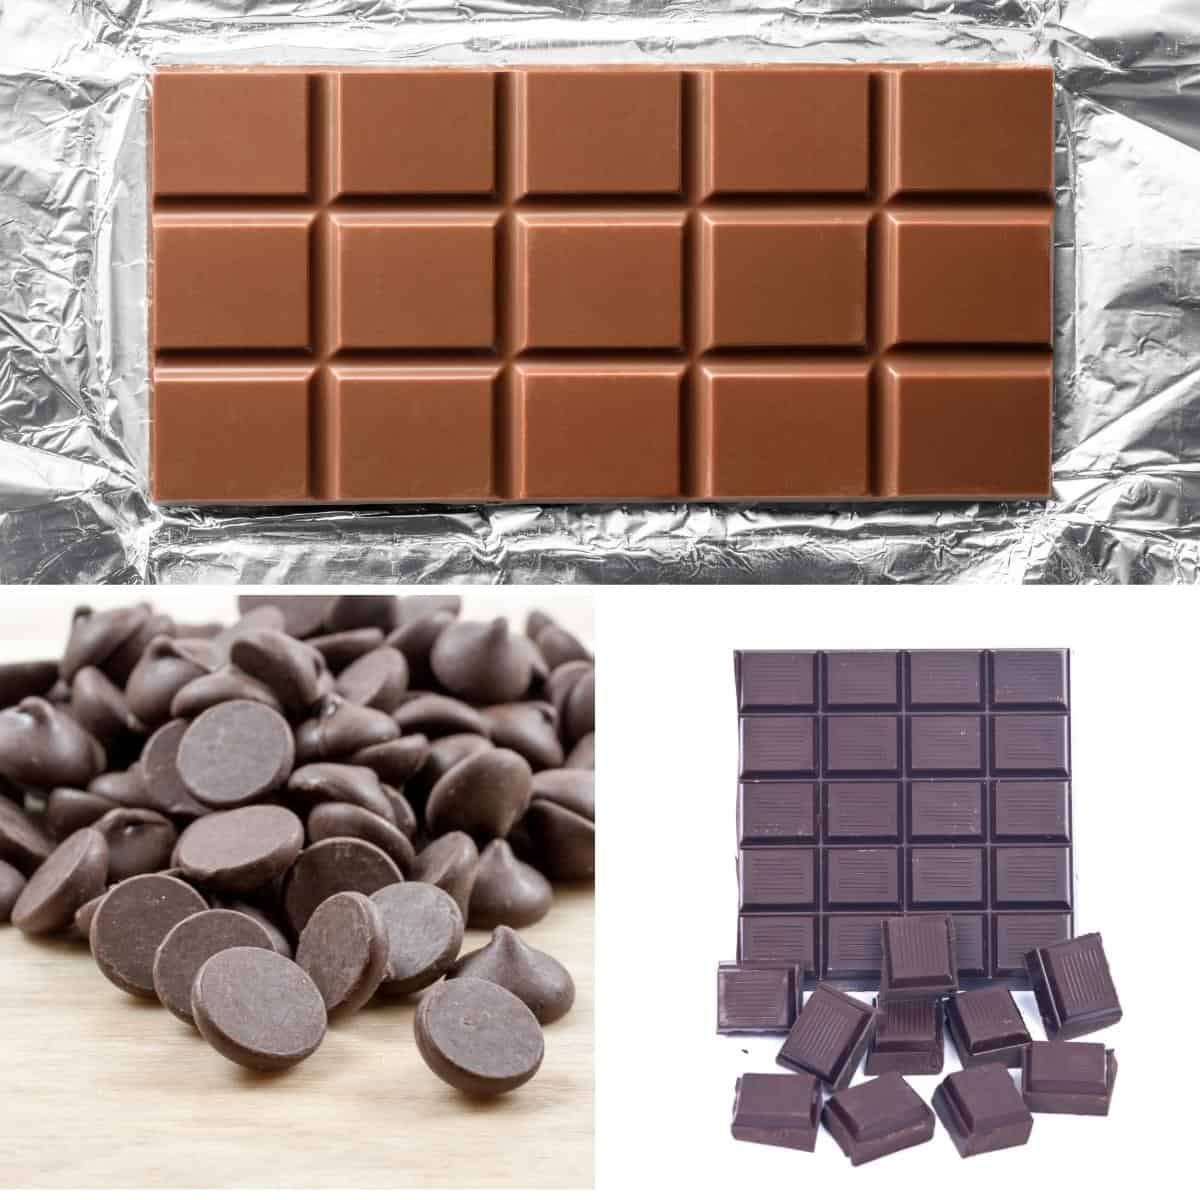 Chocolate bar, chocolate chips and coverture chocolate